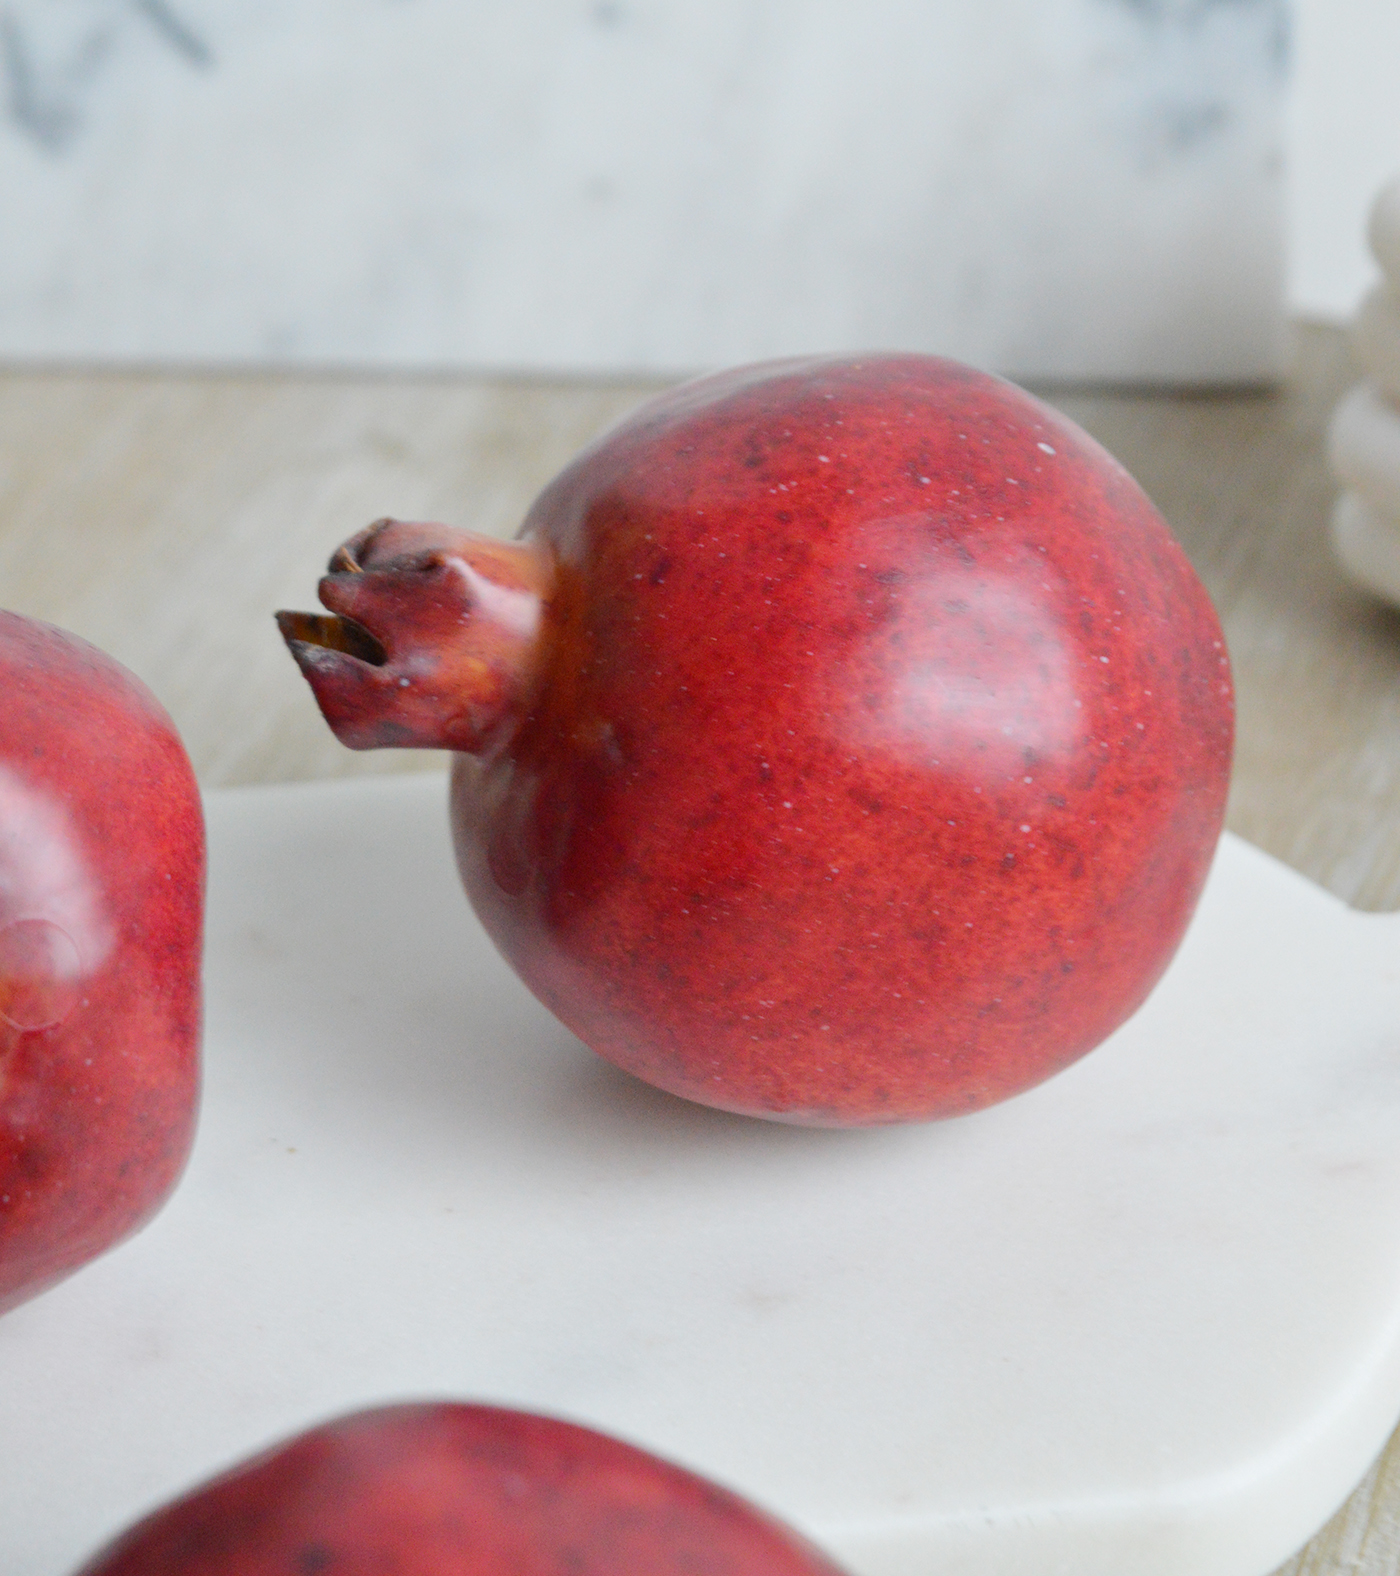 Decorative realistic faux Pomegranate - New England interiors to complement our range of modern farmhouse, countyr and coastal furniture